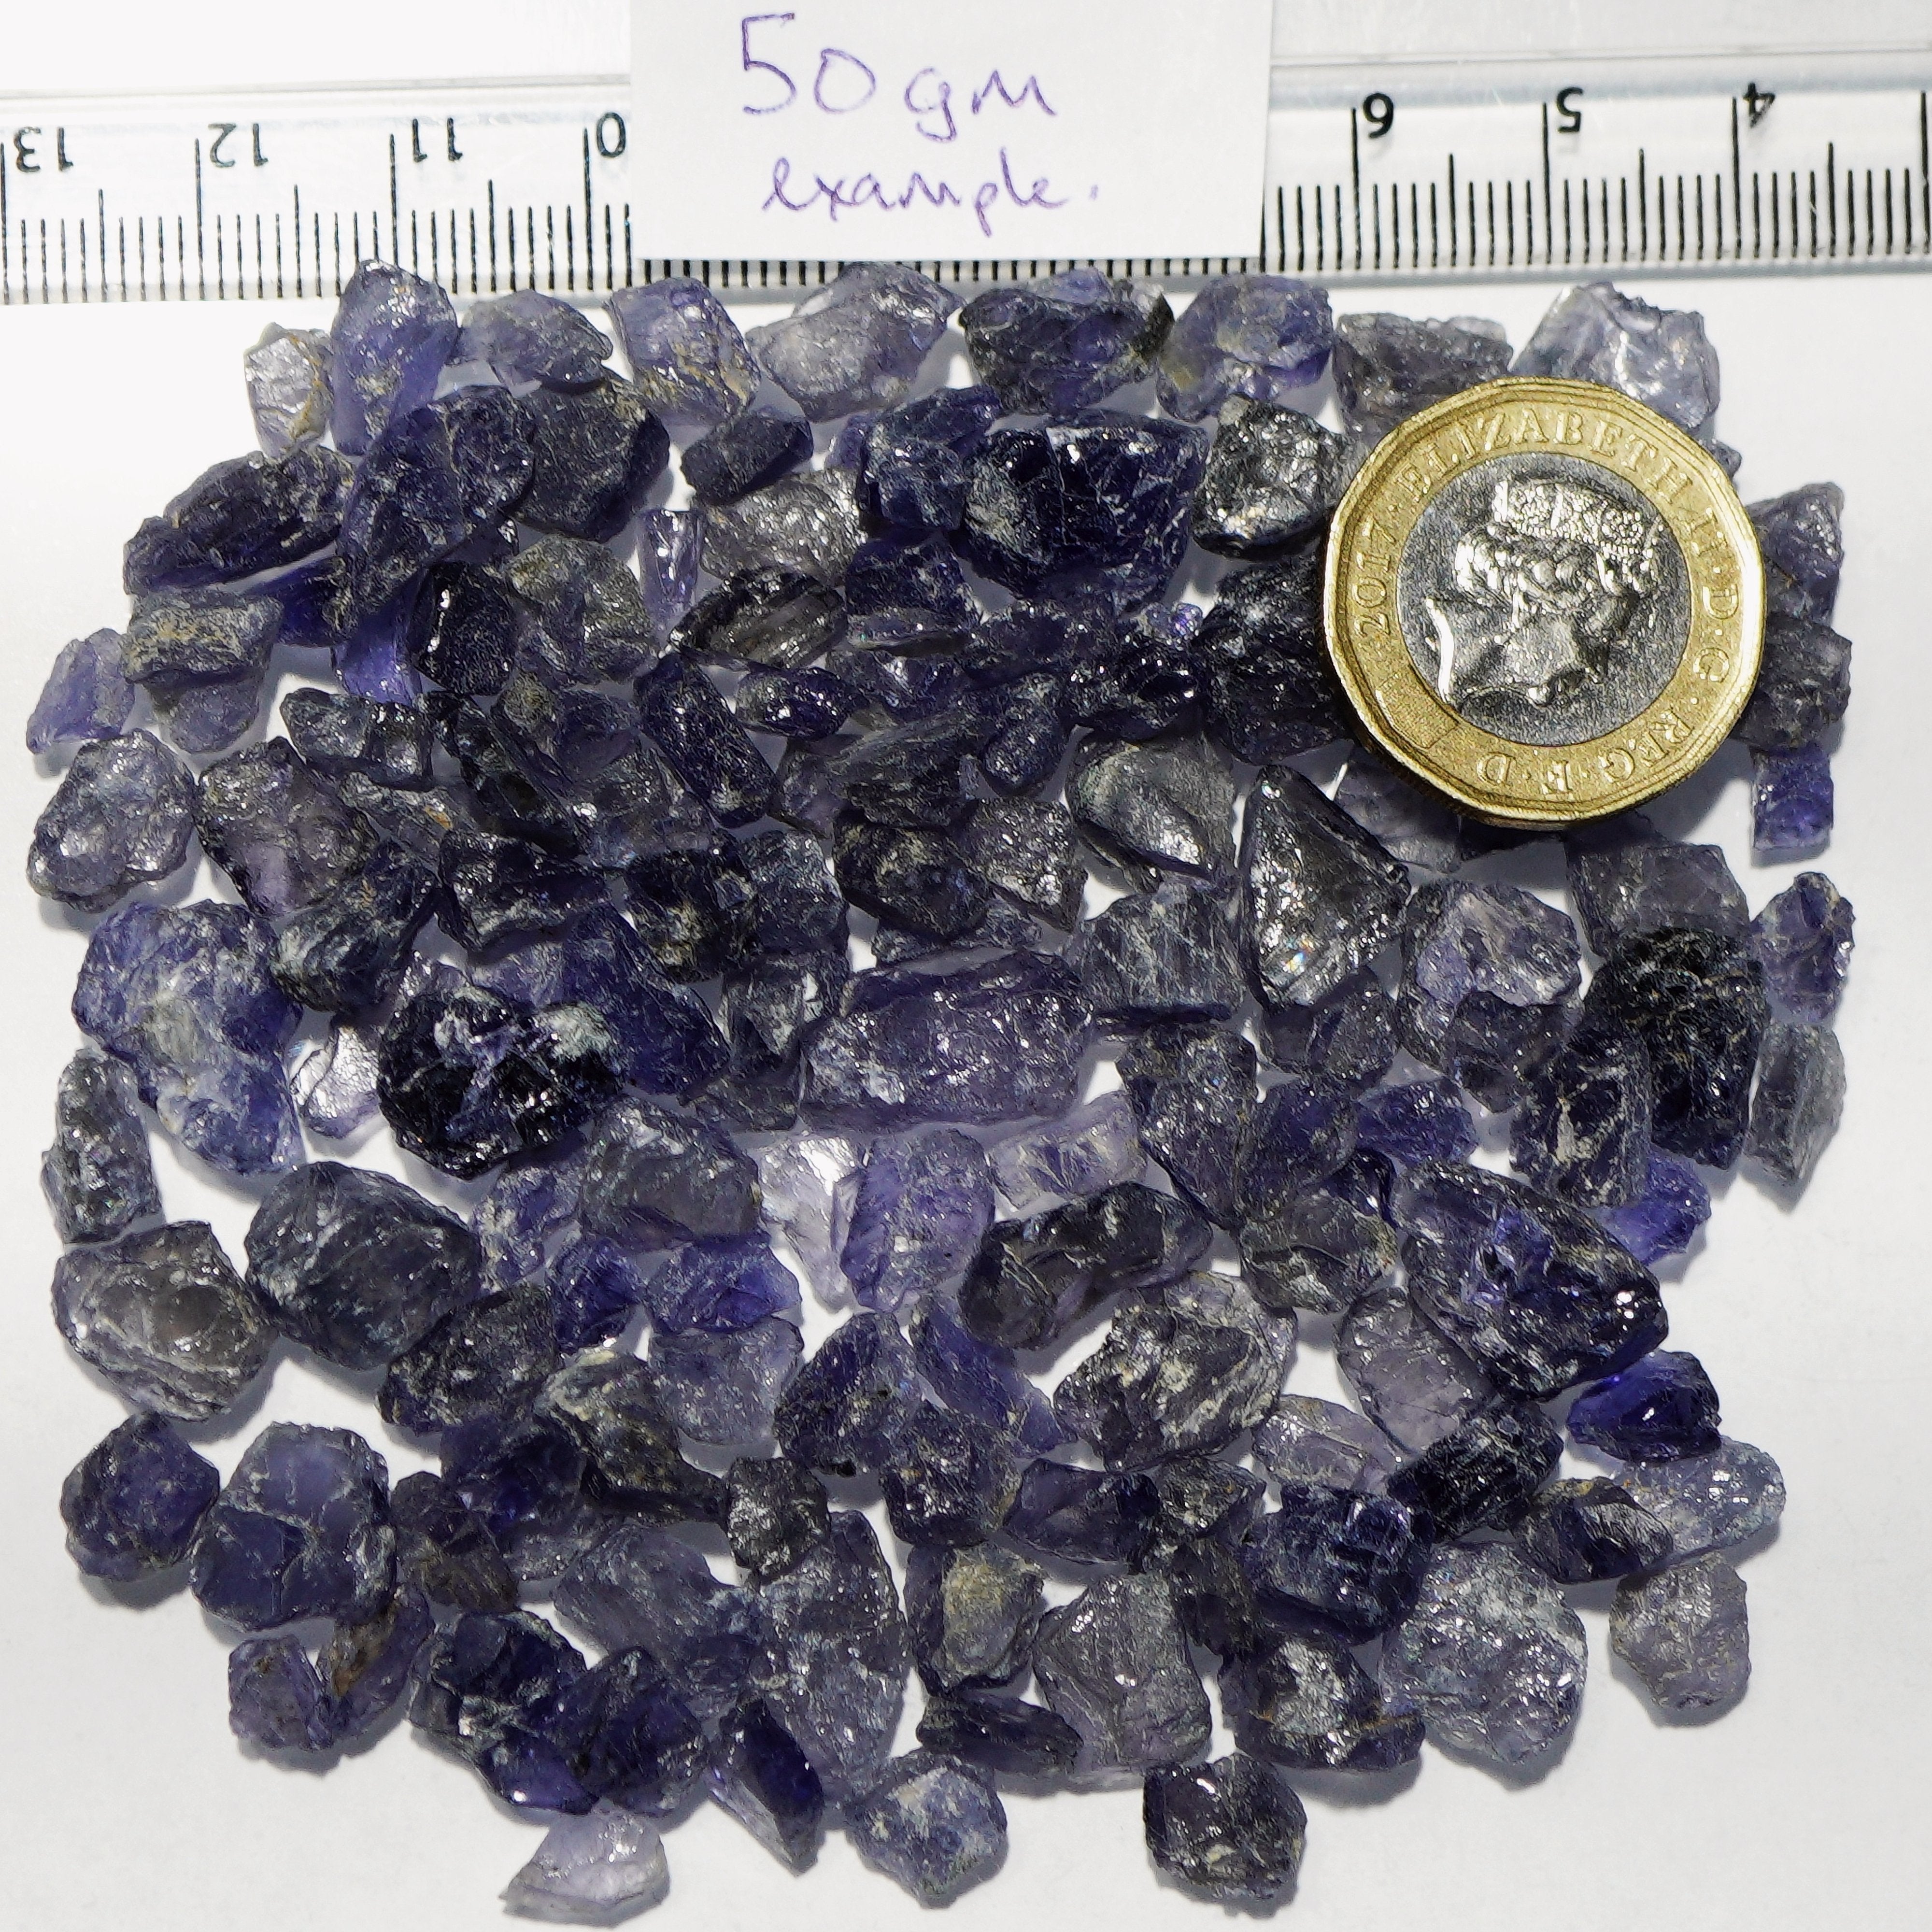 50G Iolite Lots Tanzania Blind Pour Basis 0.2G - 3G Sizes Cab Grade To Bead Rough Buy As Much You